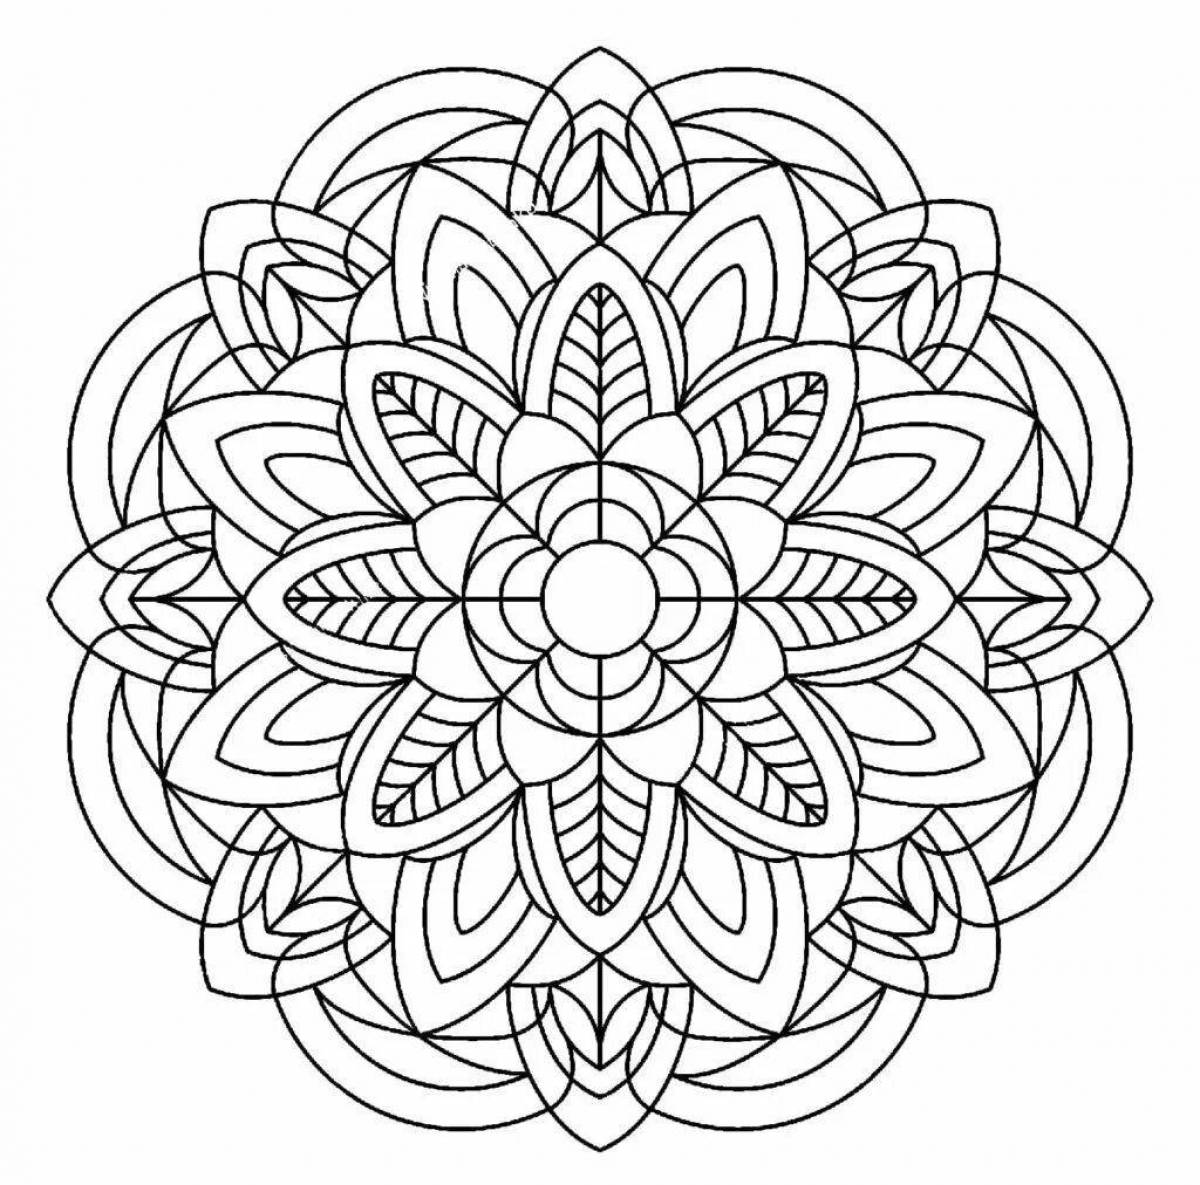 Bright coloring flower of life